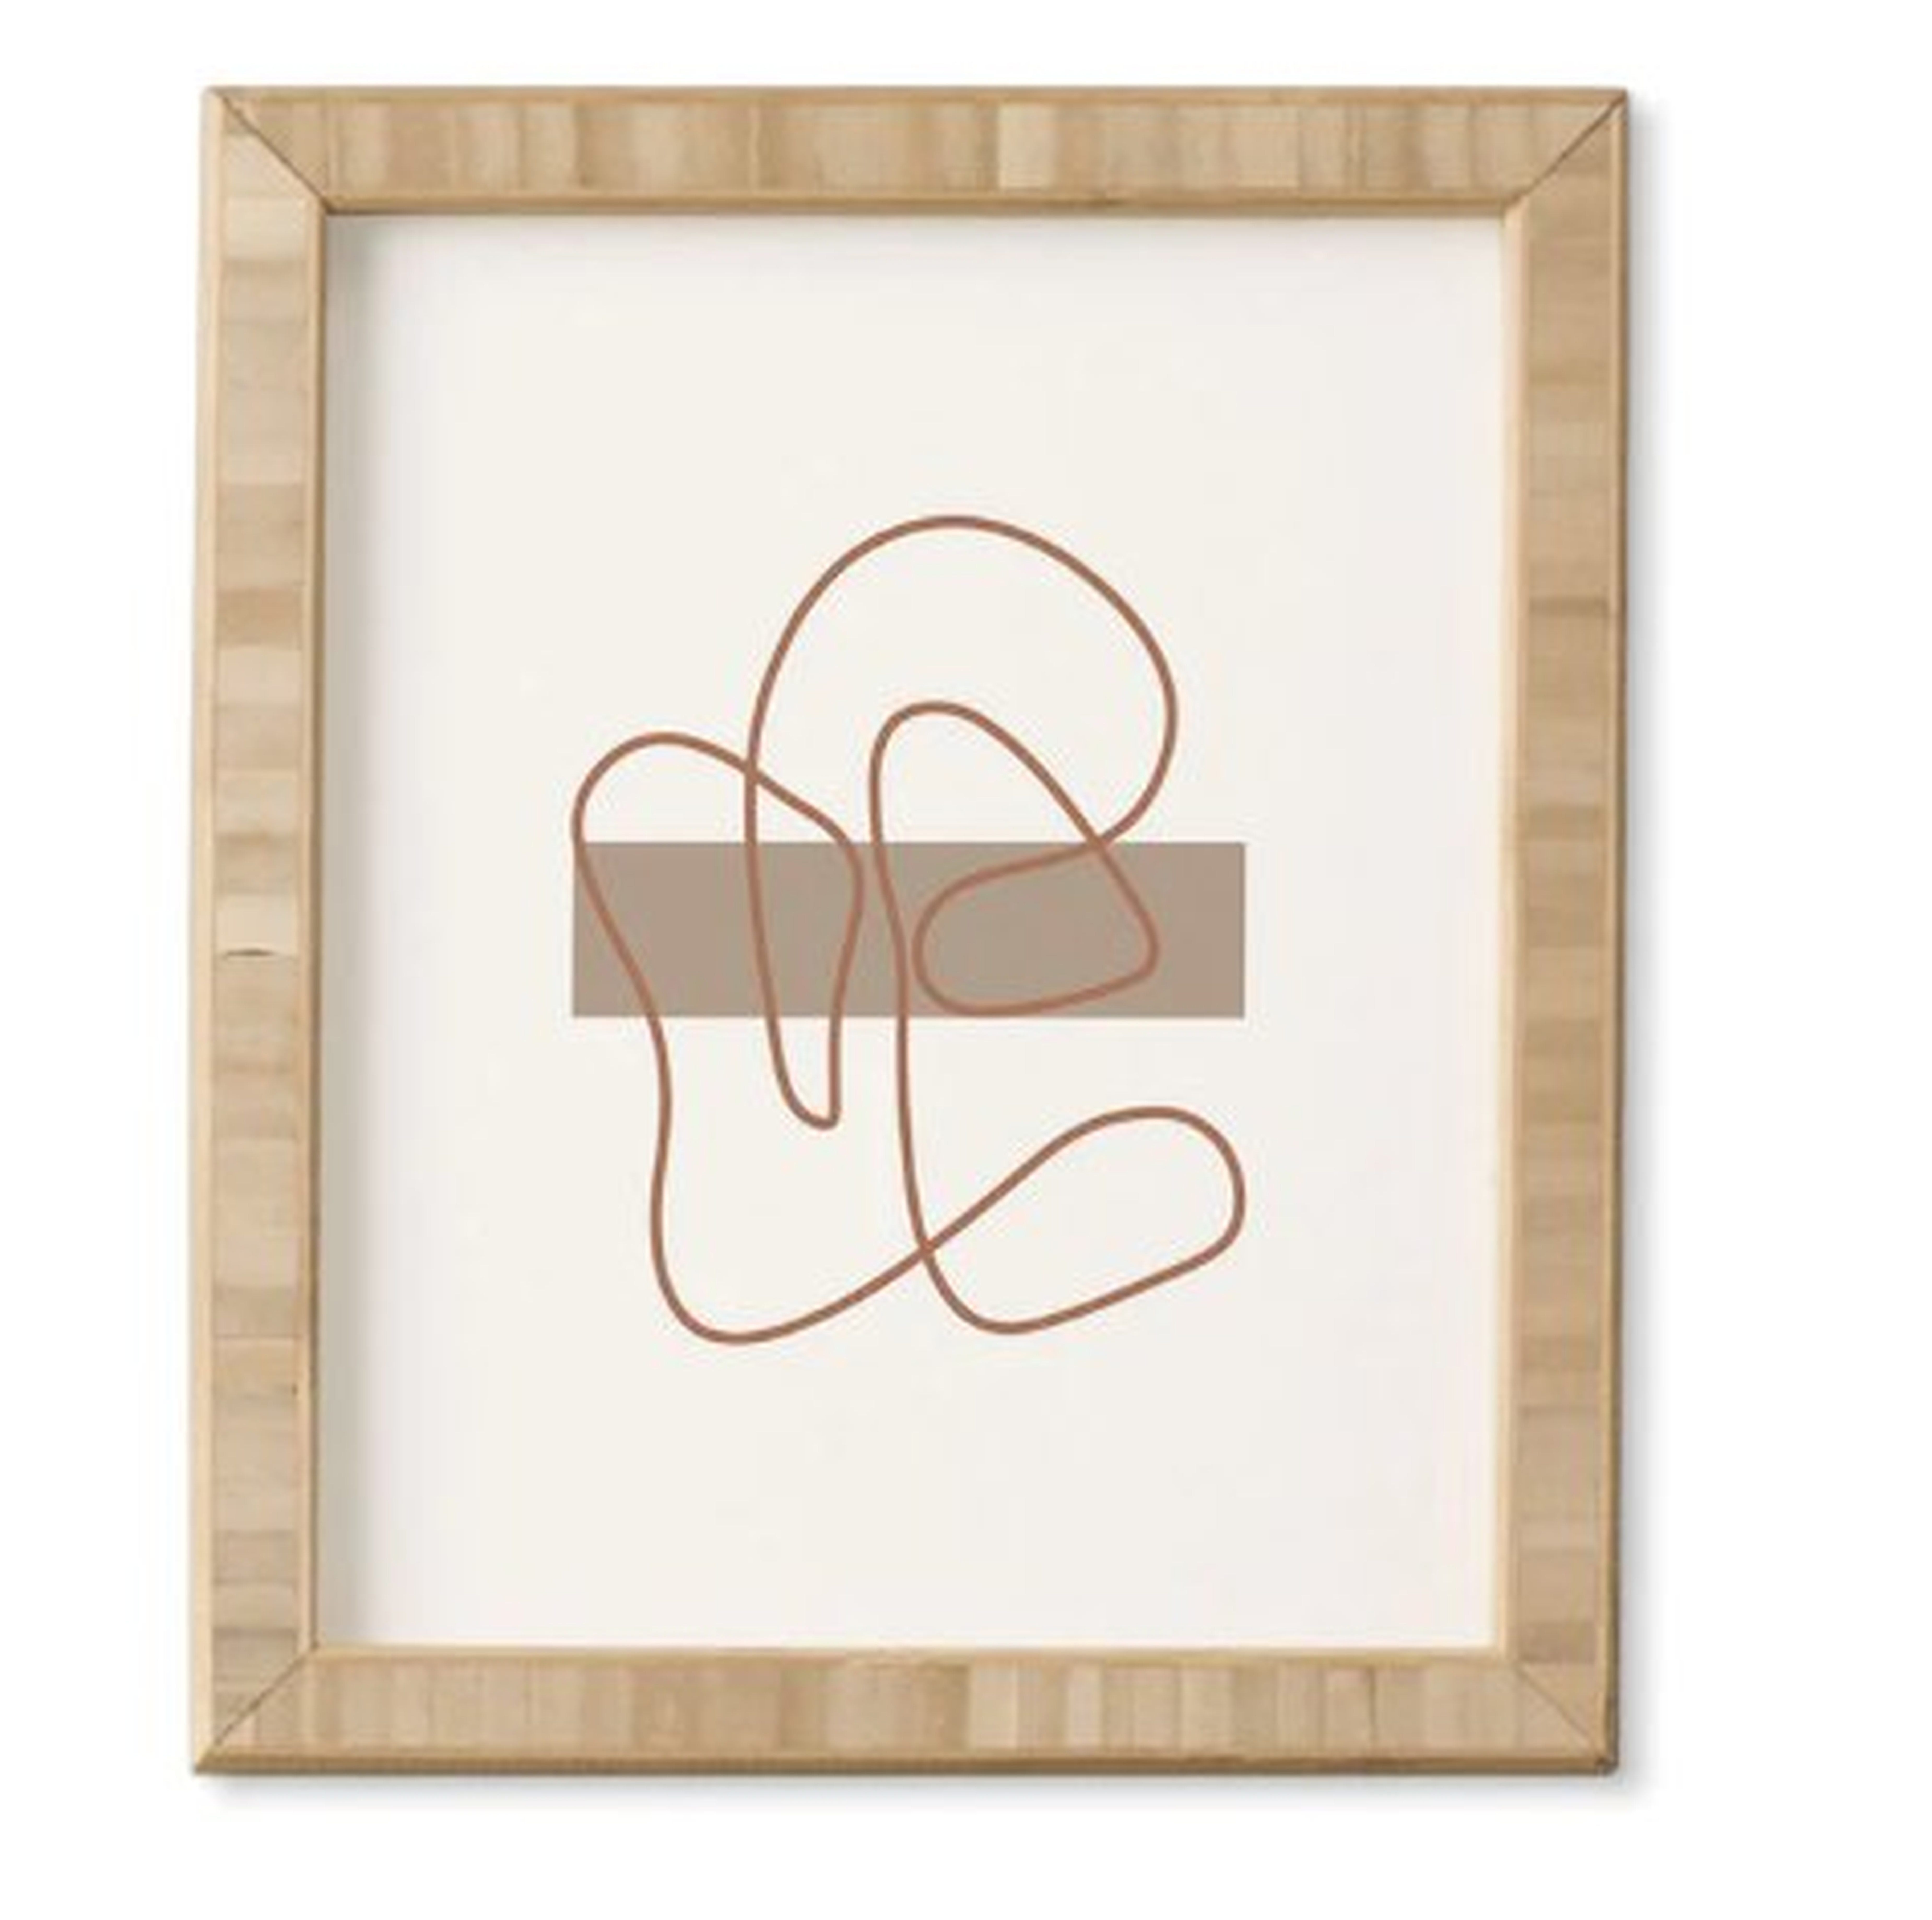 Abstract Line Neutral by Mambo Art Studio - Framed Wall Art Basic Gold 8" x 9.5" - Wander Print Co.